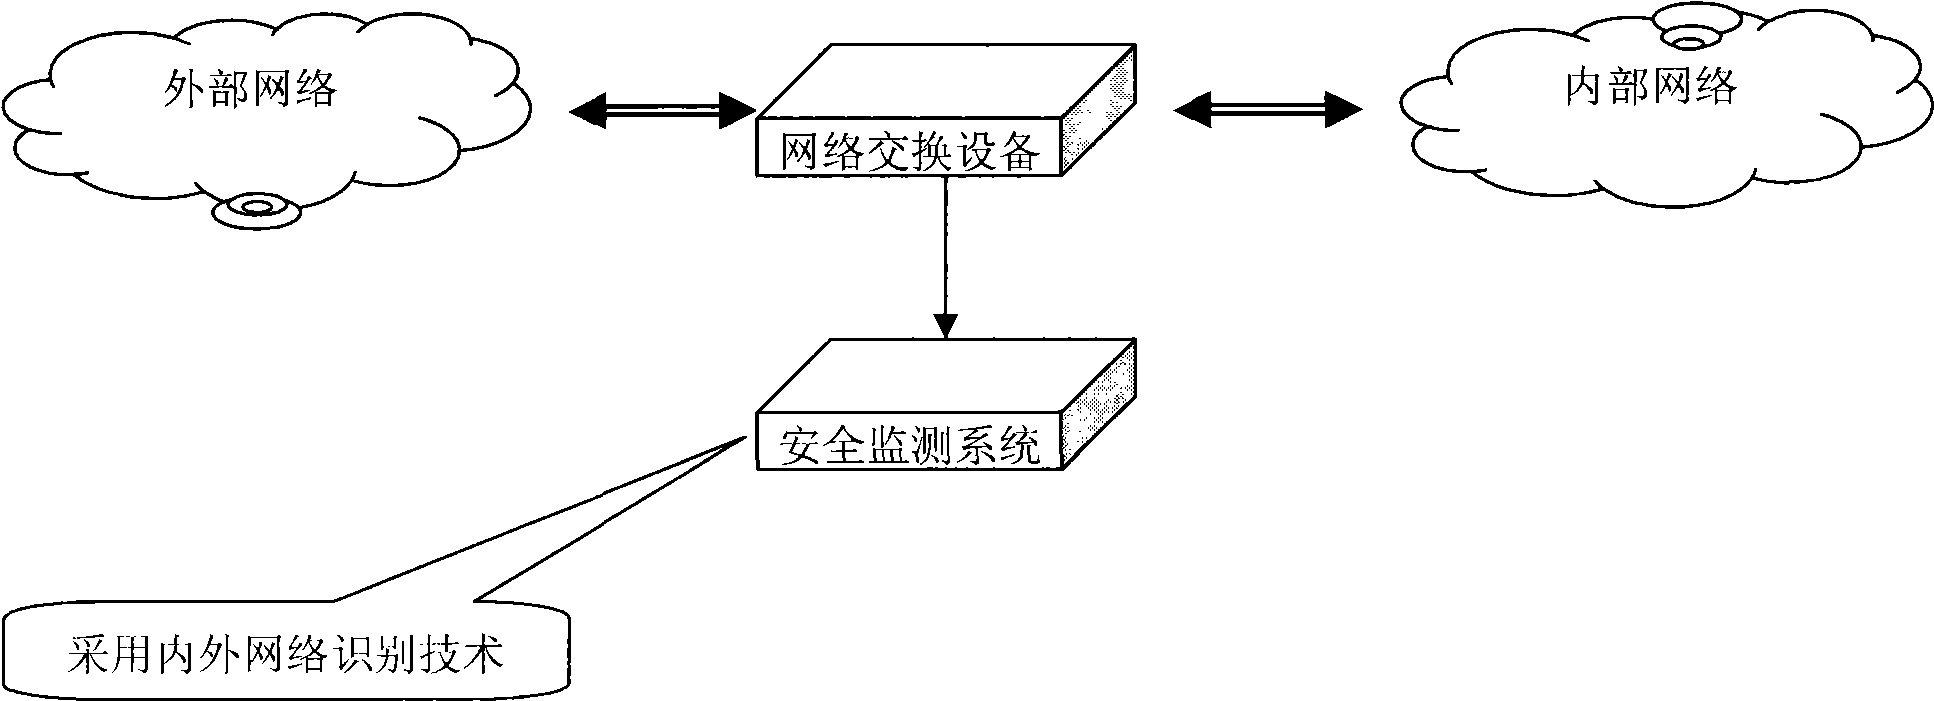 Identification method of inside and outside network messages